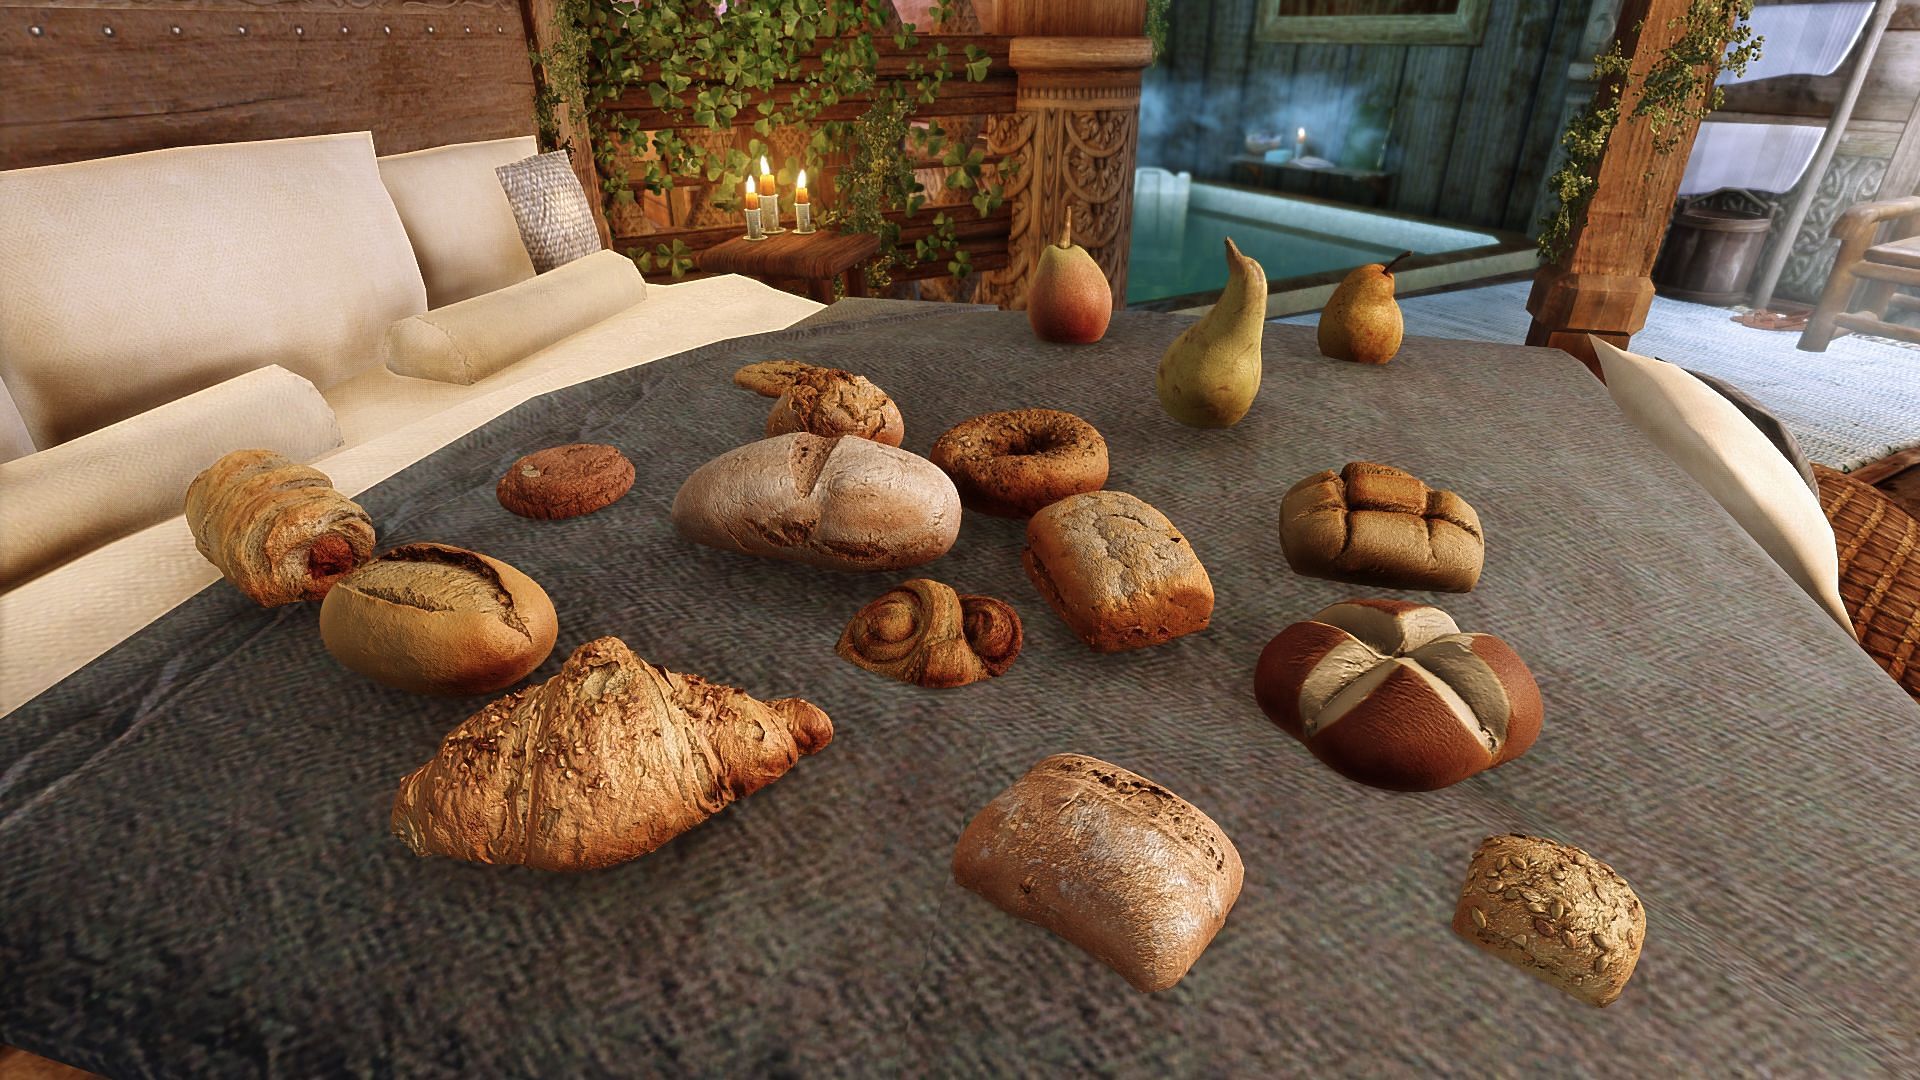 Skyrim boasts a bigger assortment of food items than Oblivion and Morrowind combined